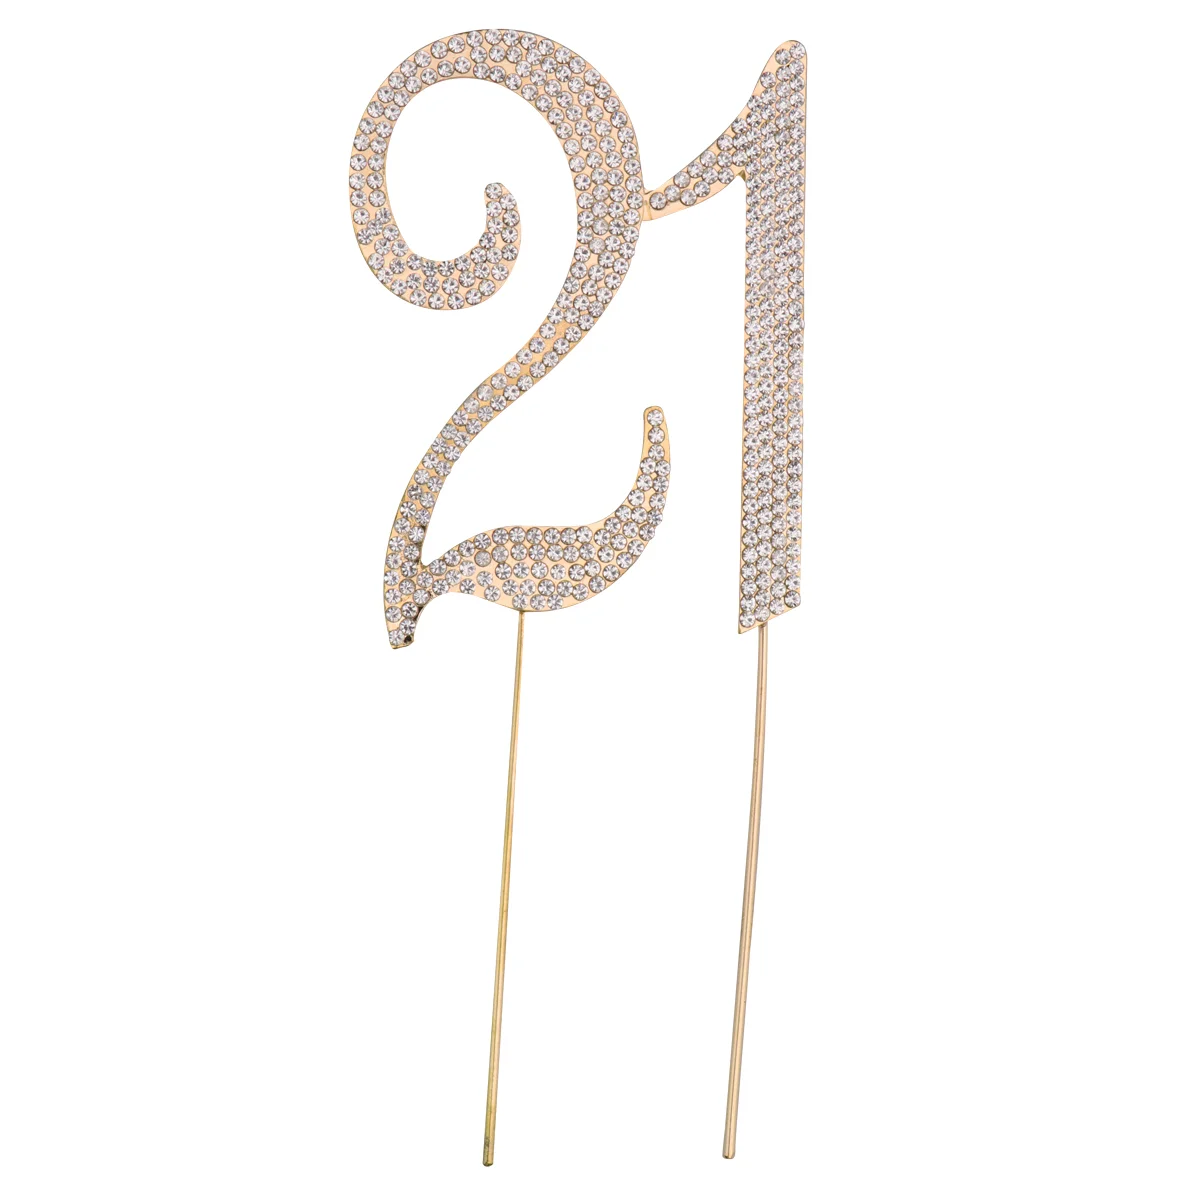 

Cake Birthday Anniversary Decor Topperr Rhinestones Decorative 15Th Number Topperss Cupcake Pick Topper Party Toppers Wedding